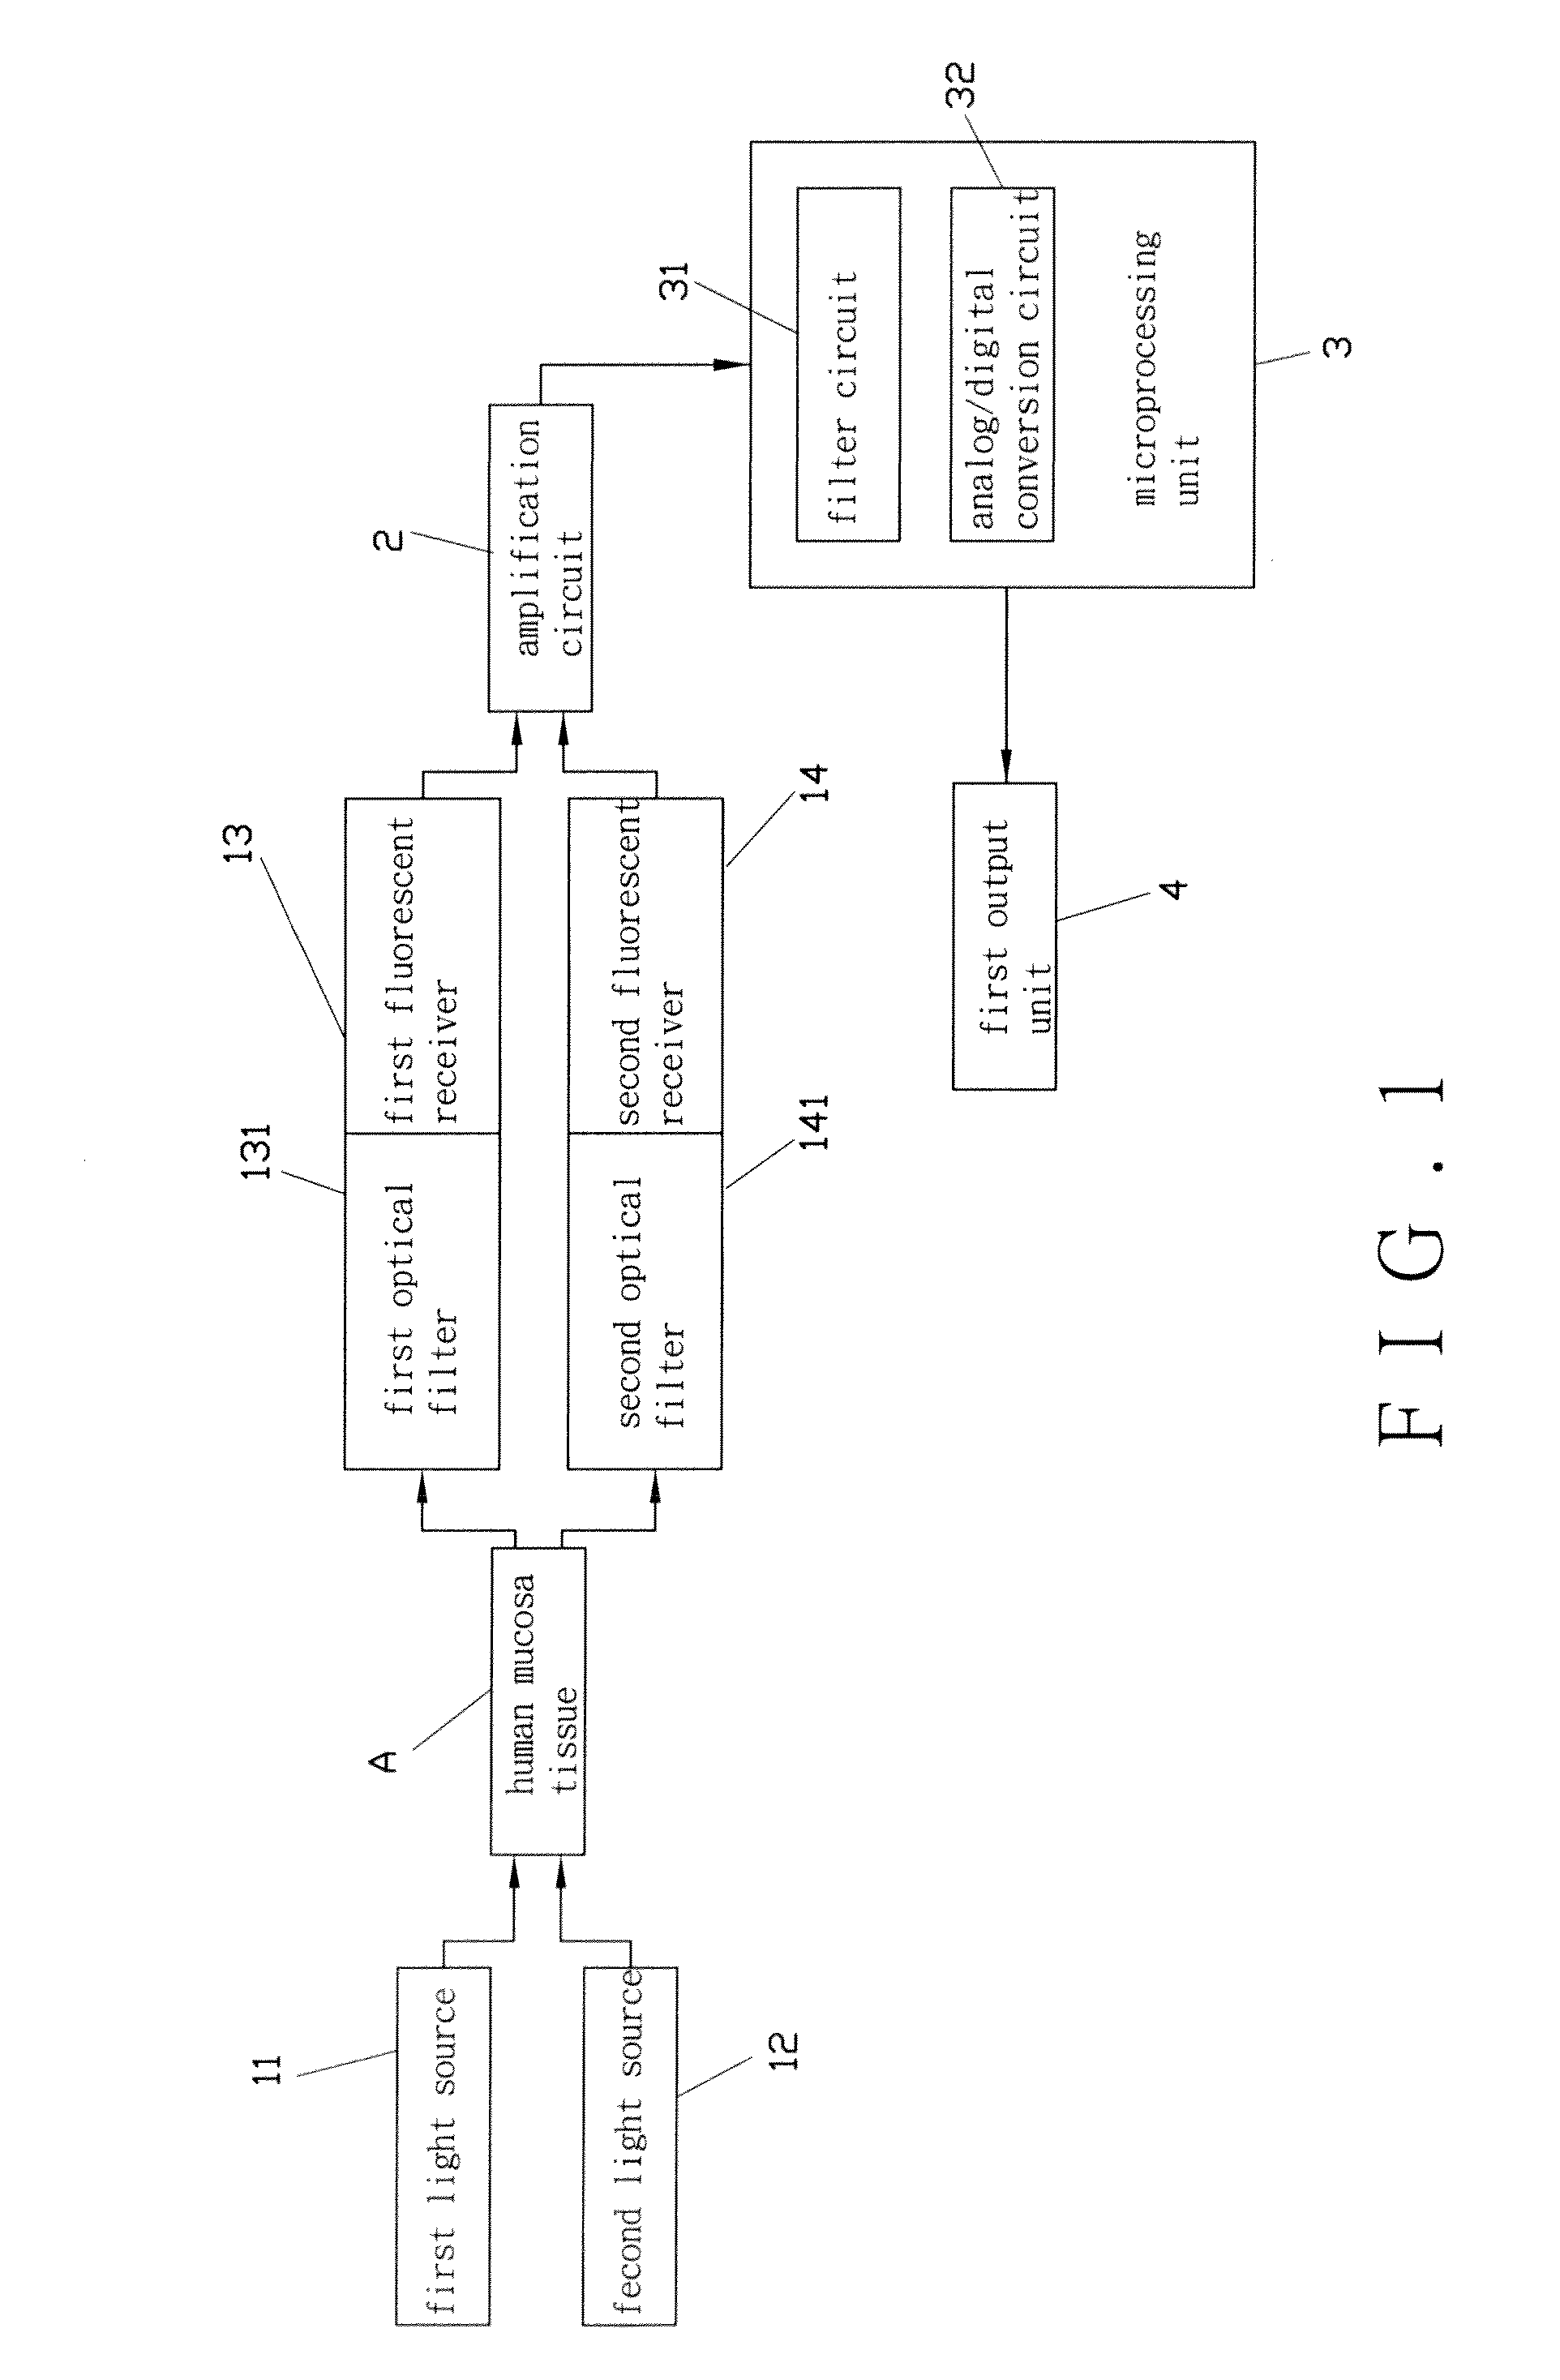 Non-invasive apparatus and method for measuring human metabolic conditions